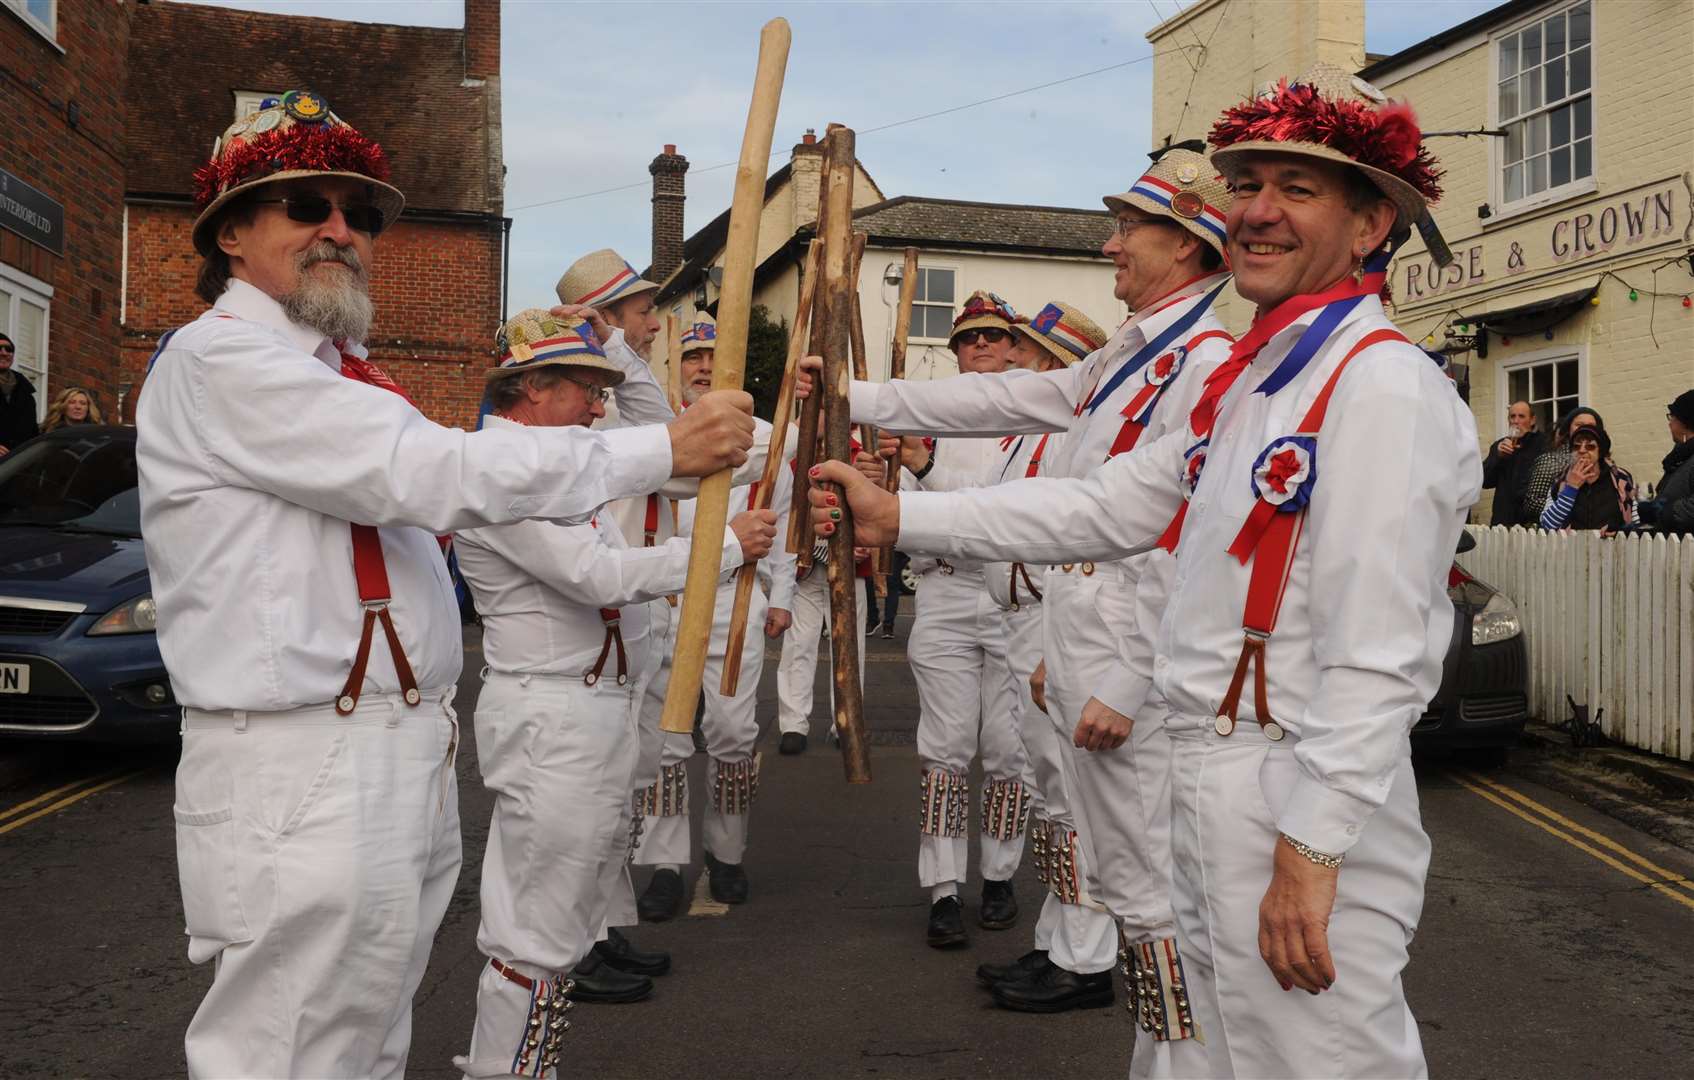 A traditional Boxing day dance with Hartley Morris. Picture: Steve Crispe